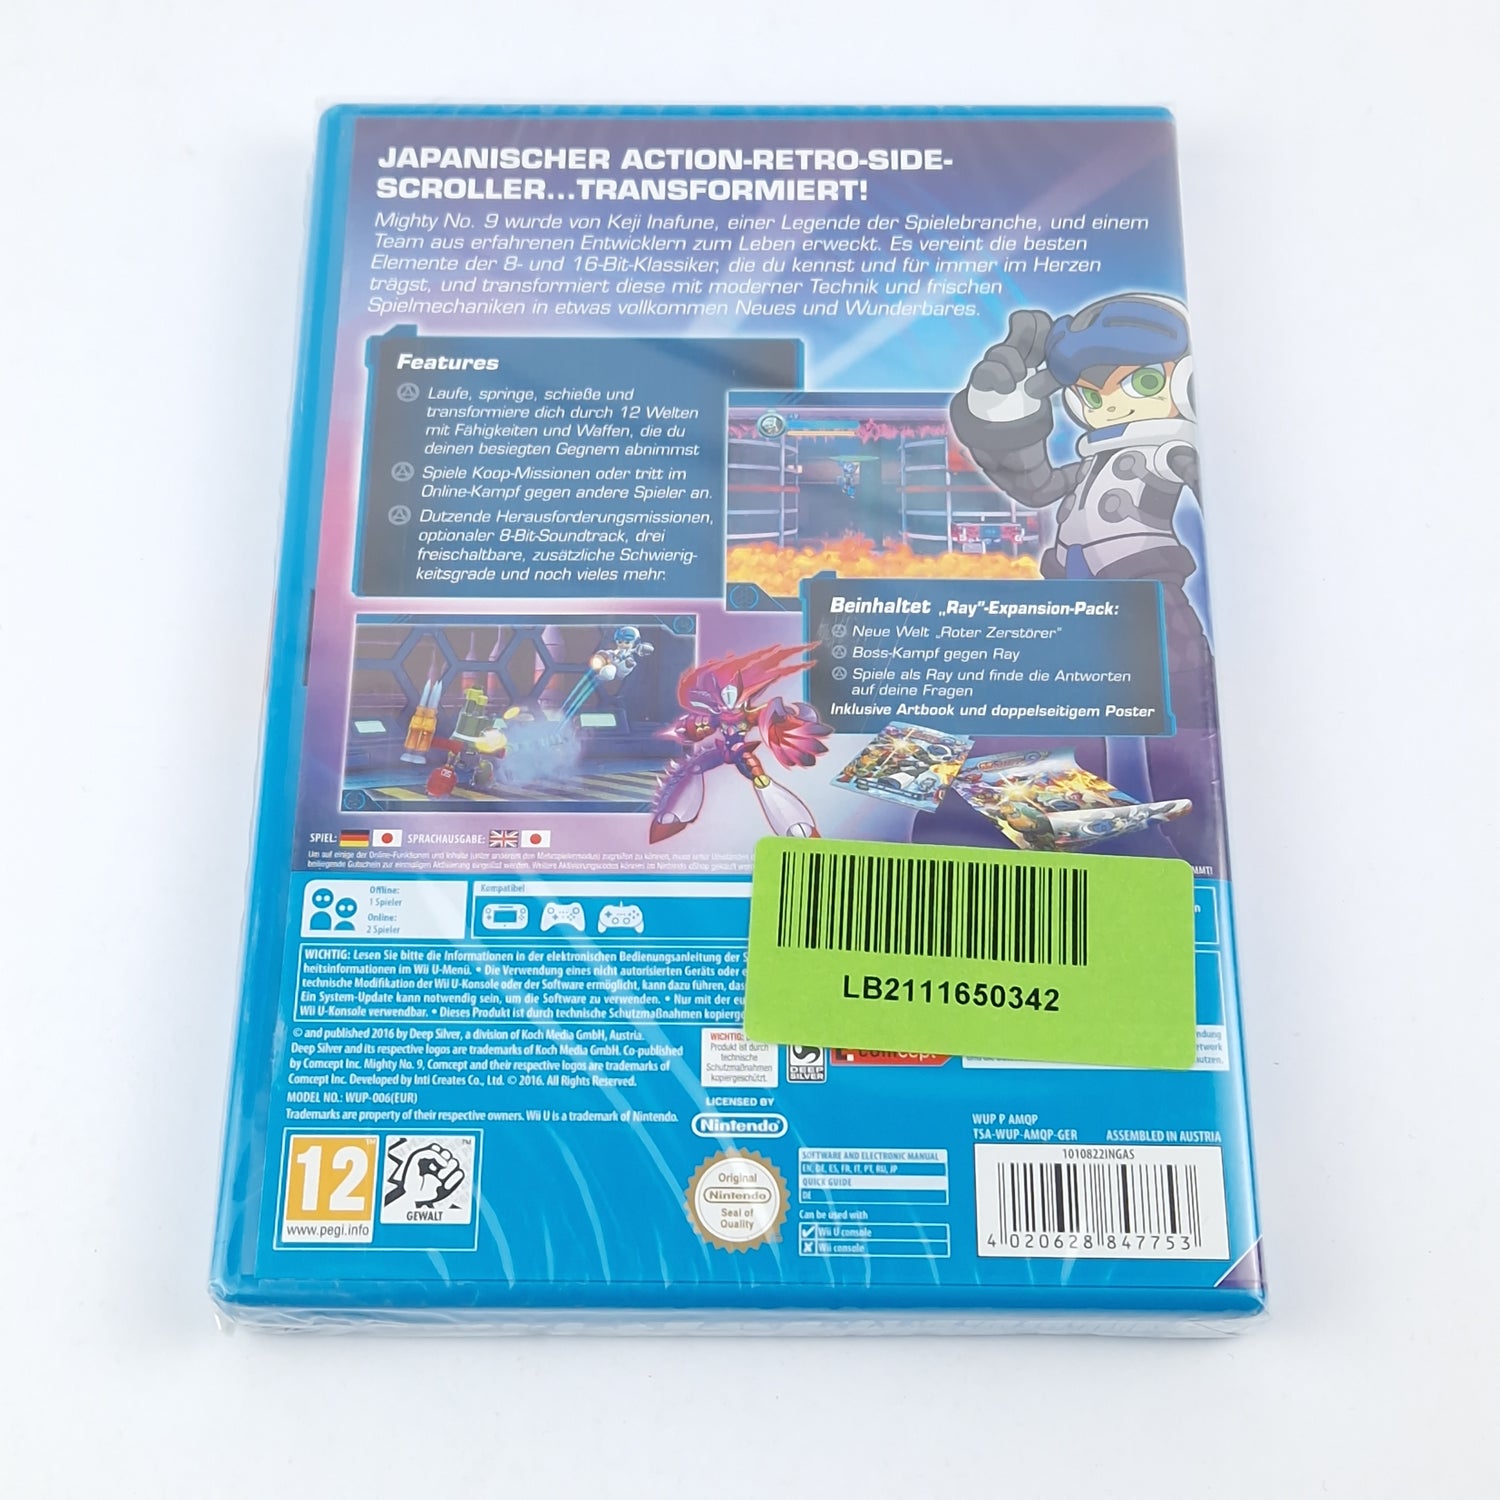 Nintendo Wii U Game: Mighty No. 9 - OVP Instructions CD Disk | PAL NEW SEALED